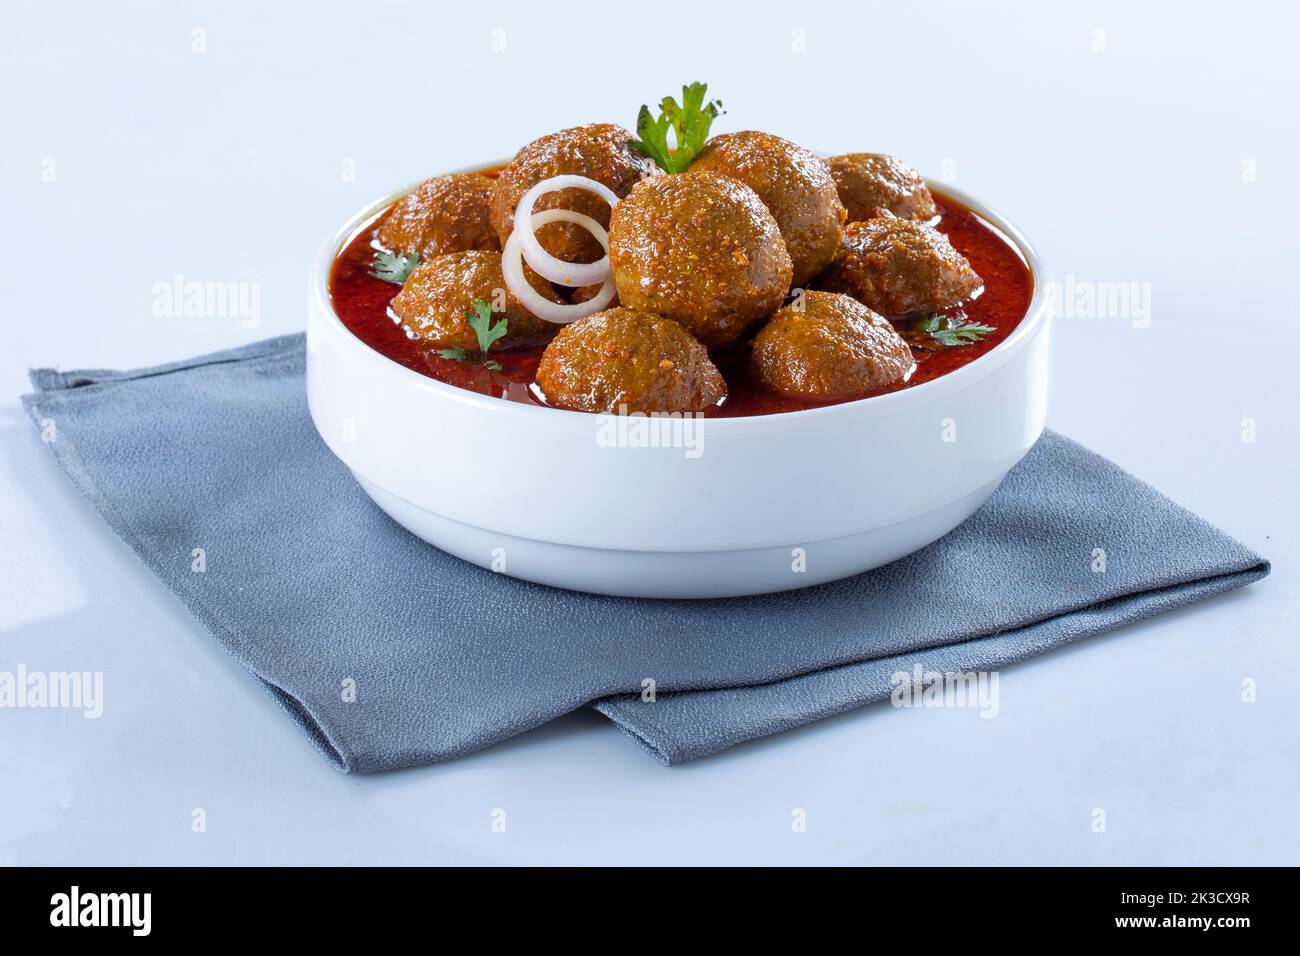 Chicken Meatballs with glaze on White background. Stock Photo